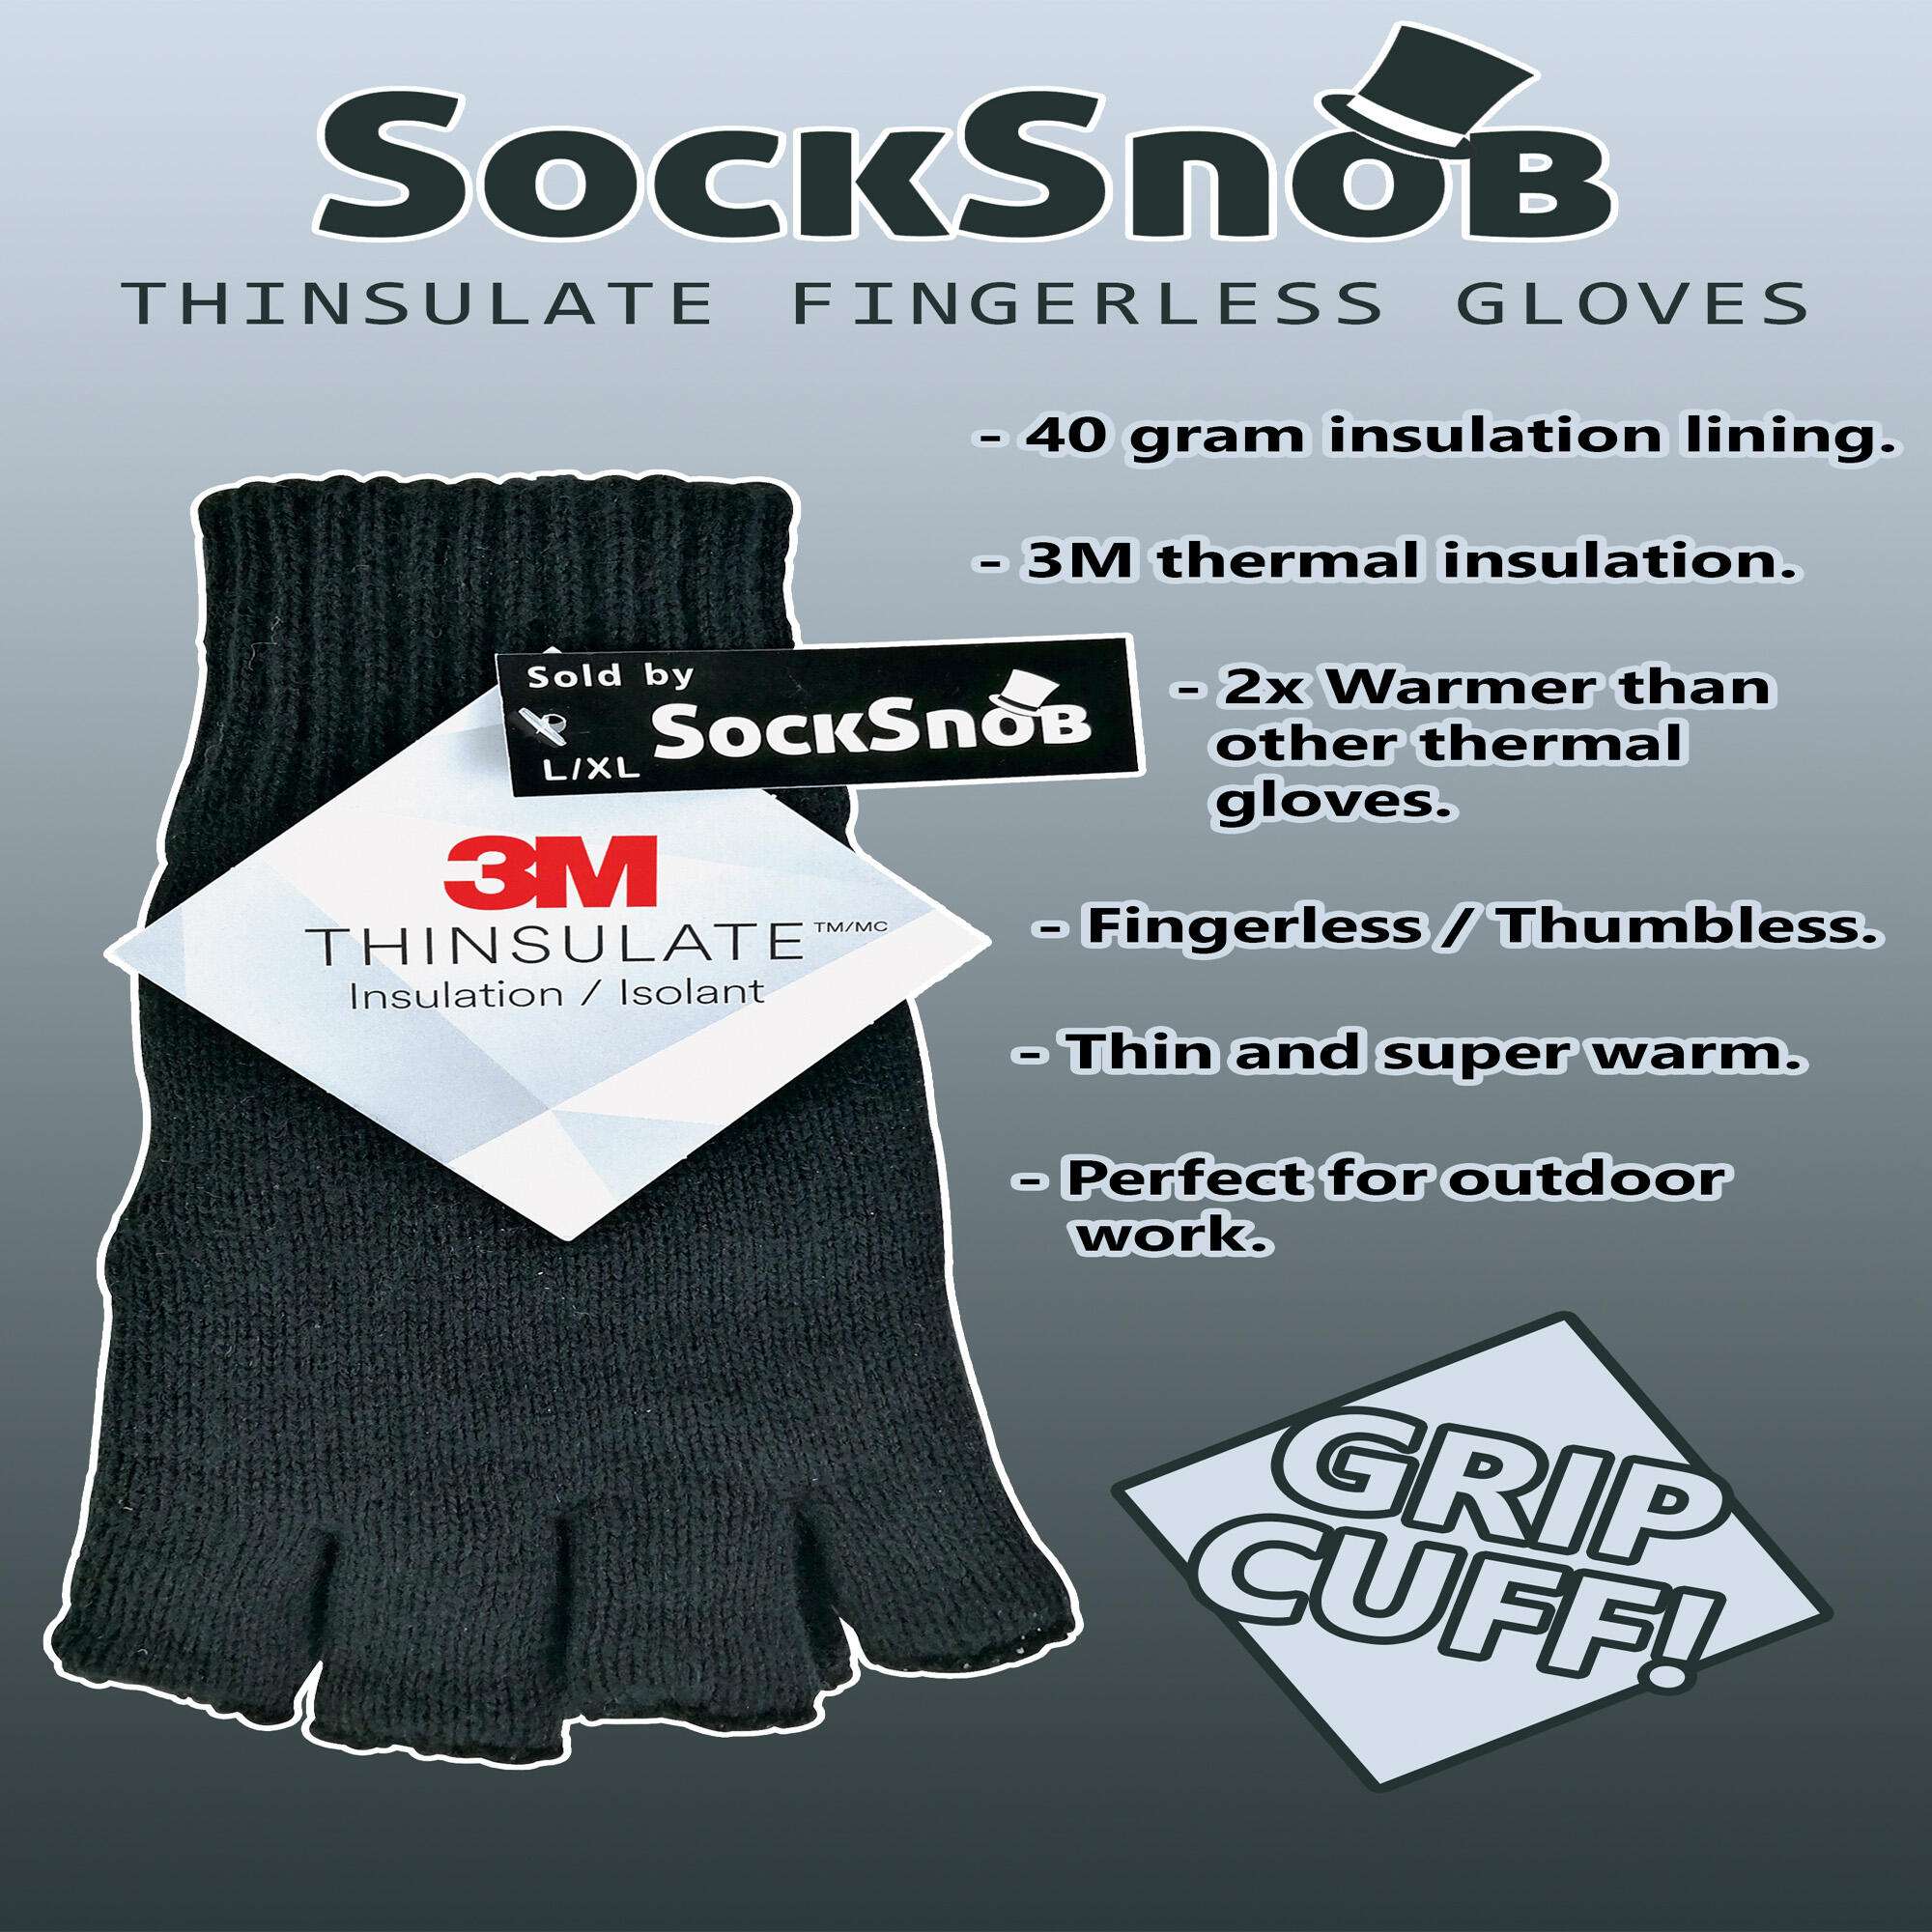 Mens 3M Thinsulate Thermal Insulated Black Fingerless Gloves 3/3